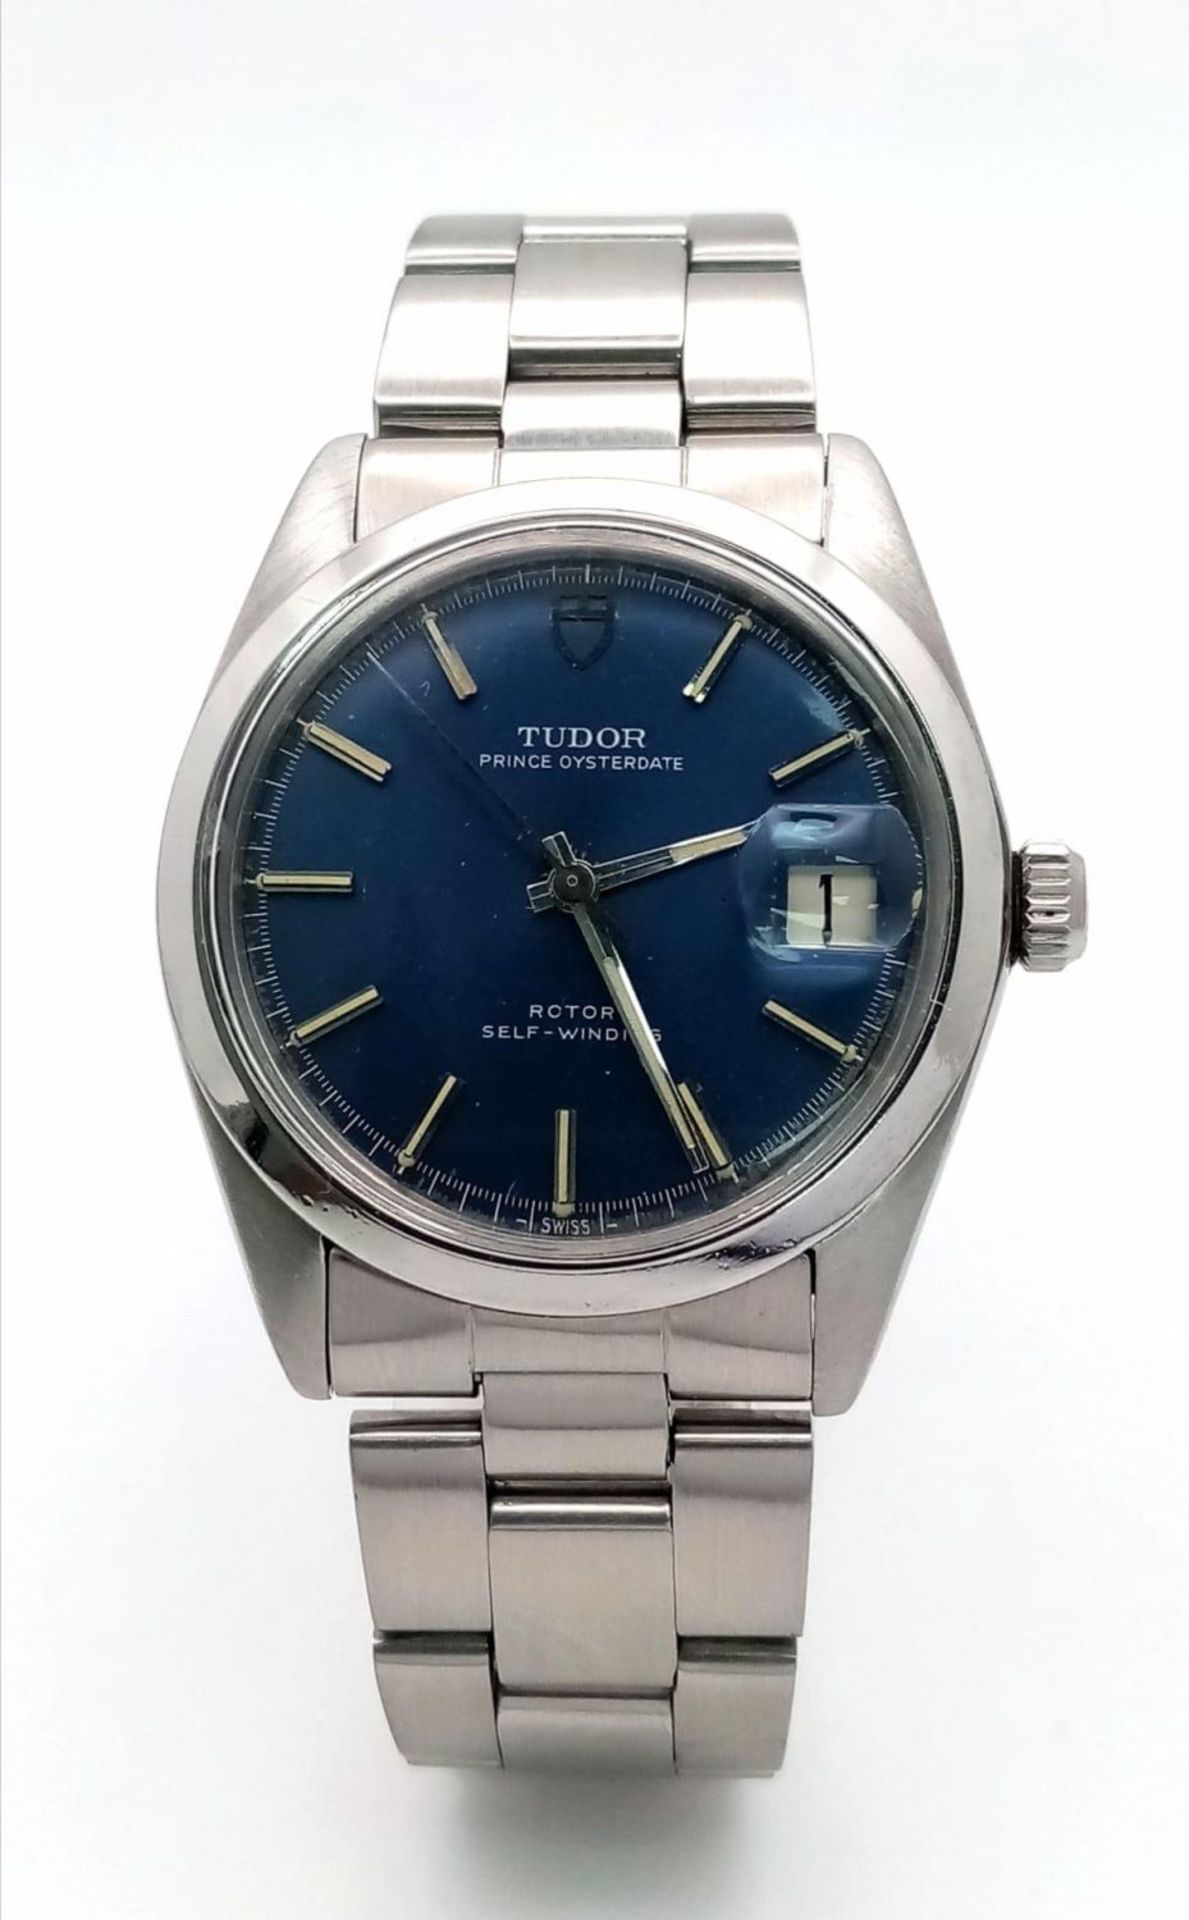 AN IMMACULATE TUDOR "PRINCE OYSTERDATE" AUTOMATIC STAINLESS STEL WATCH (ROLEX CASE AND STRAP) WITH